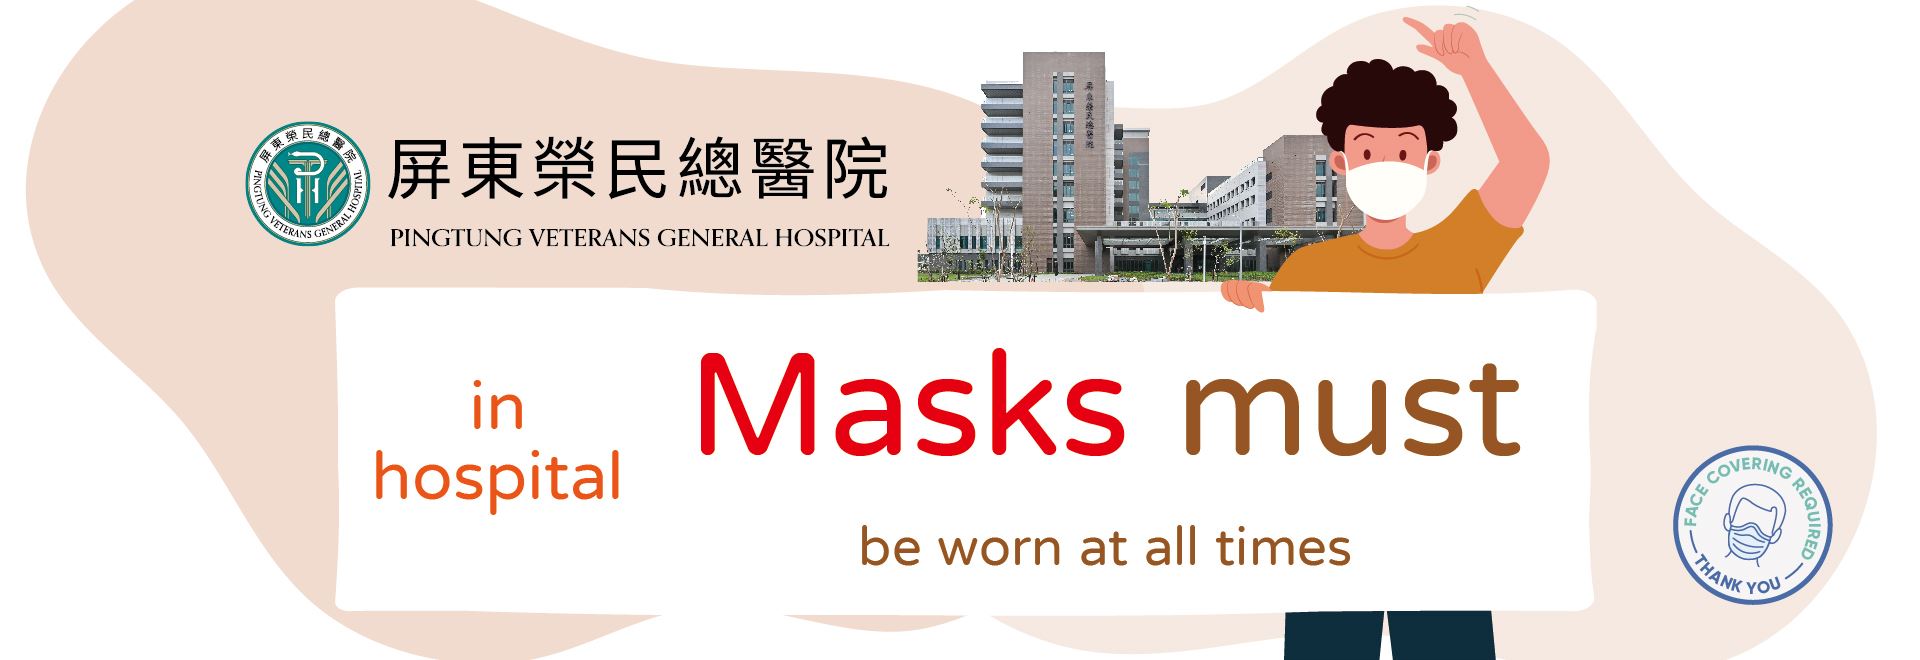 MASK MUST(Image)